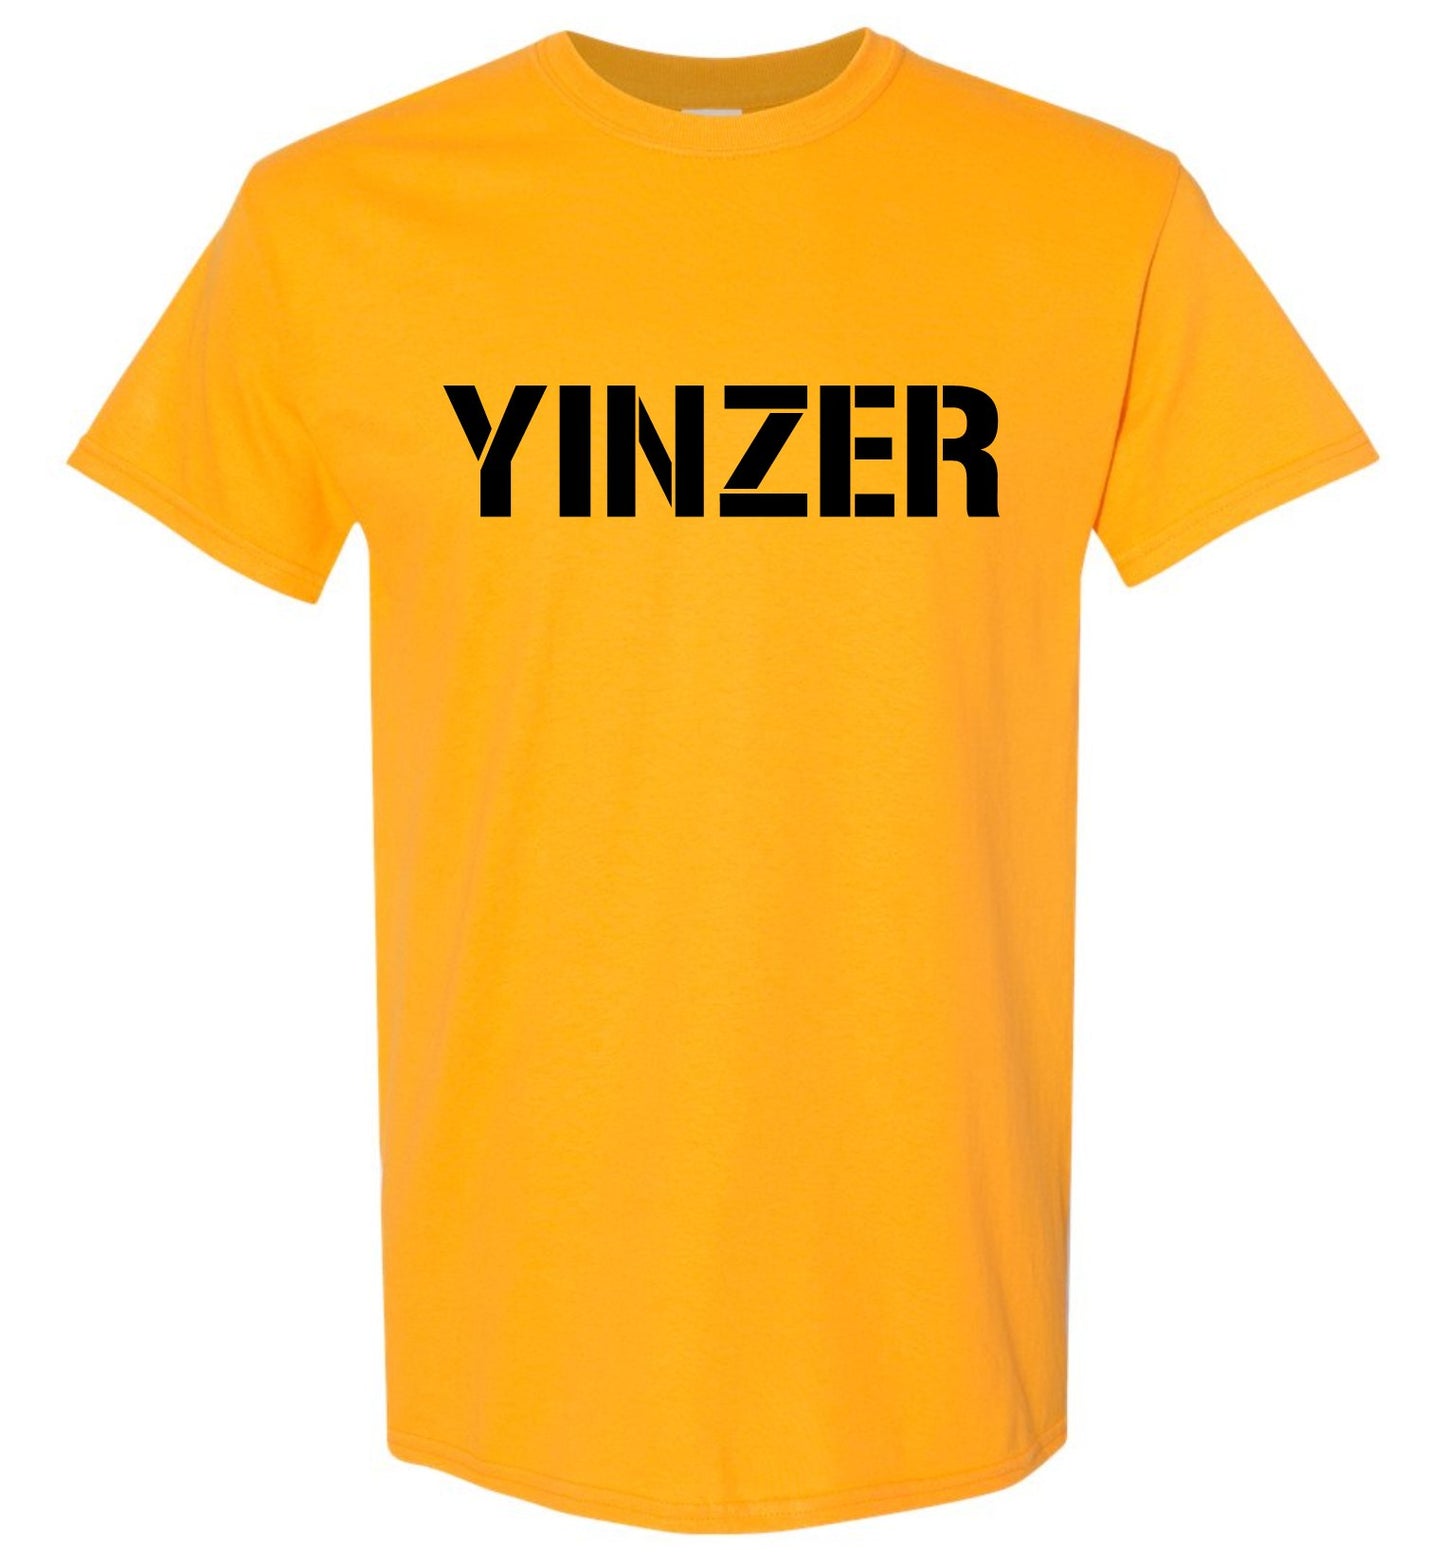 Yinzer Pittsburghese T Shirt - Youth and Adult Sizes - SBS T Shop